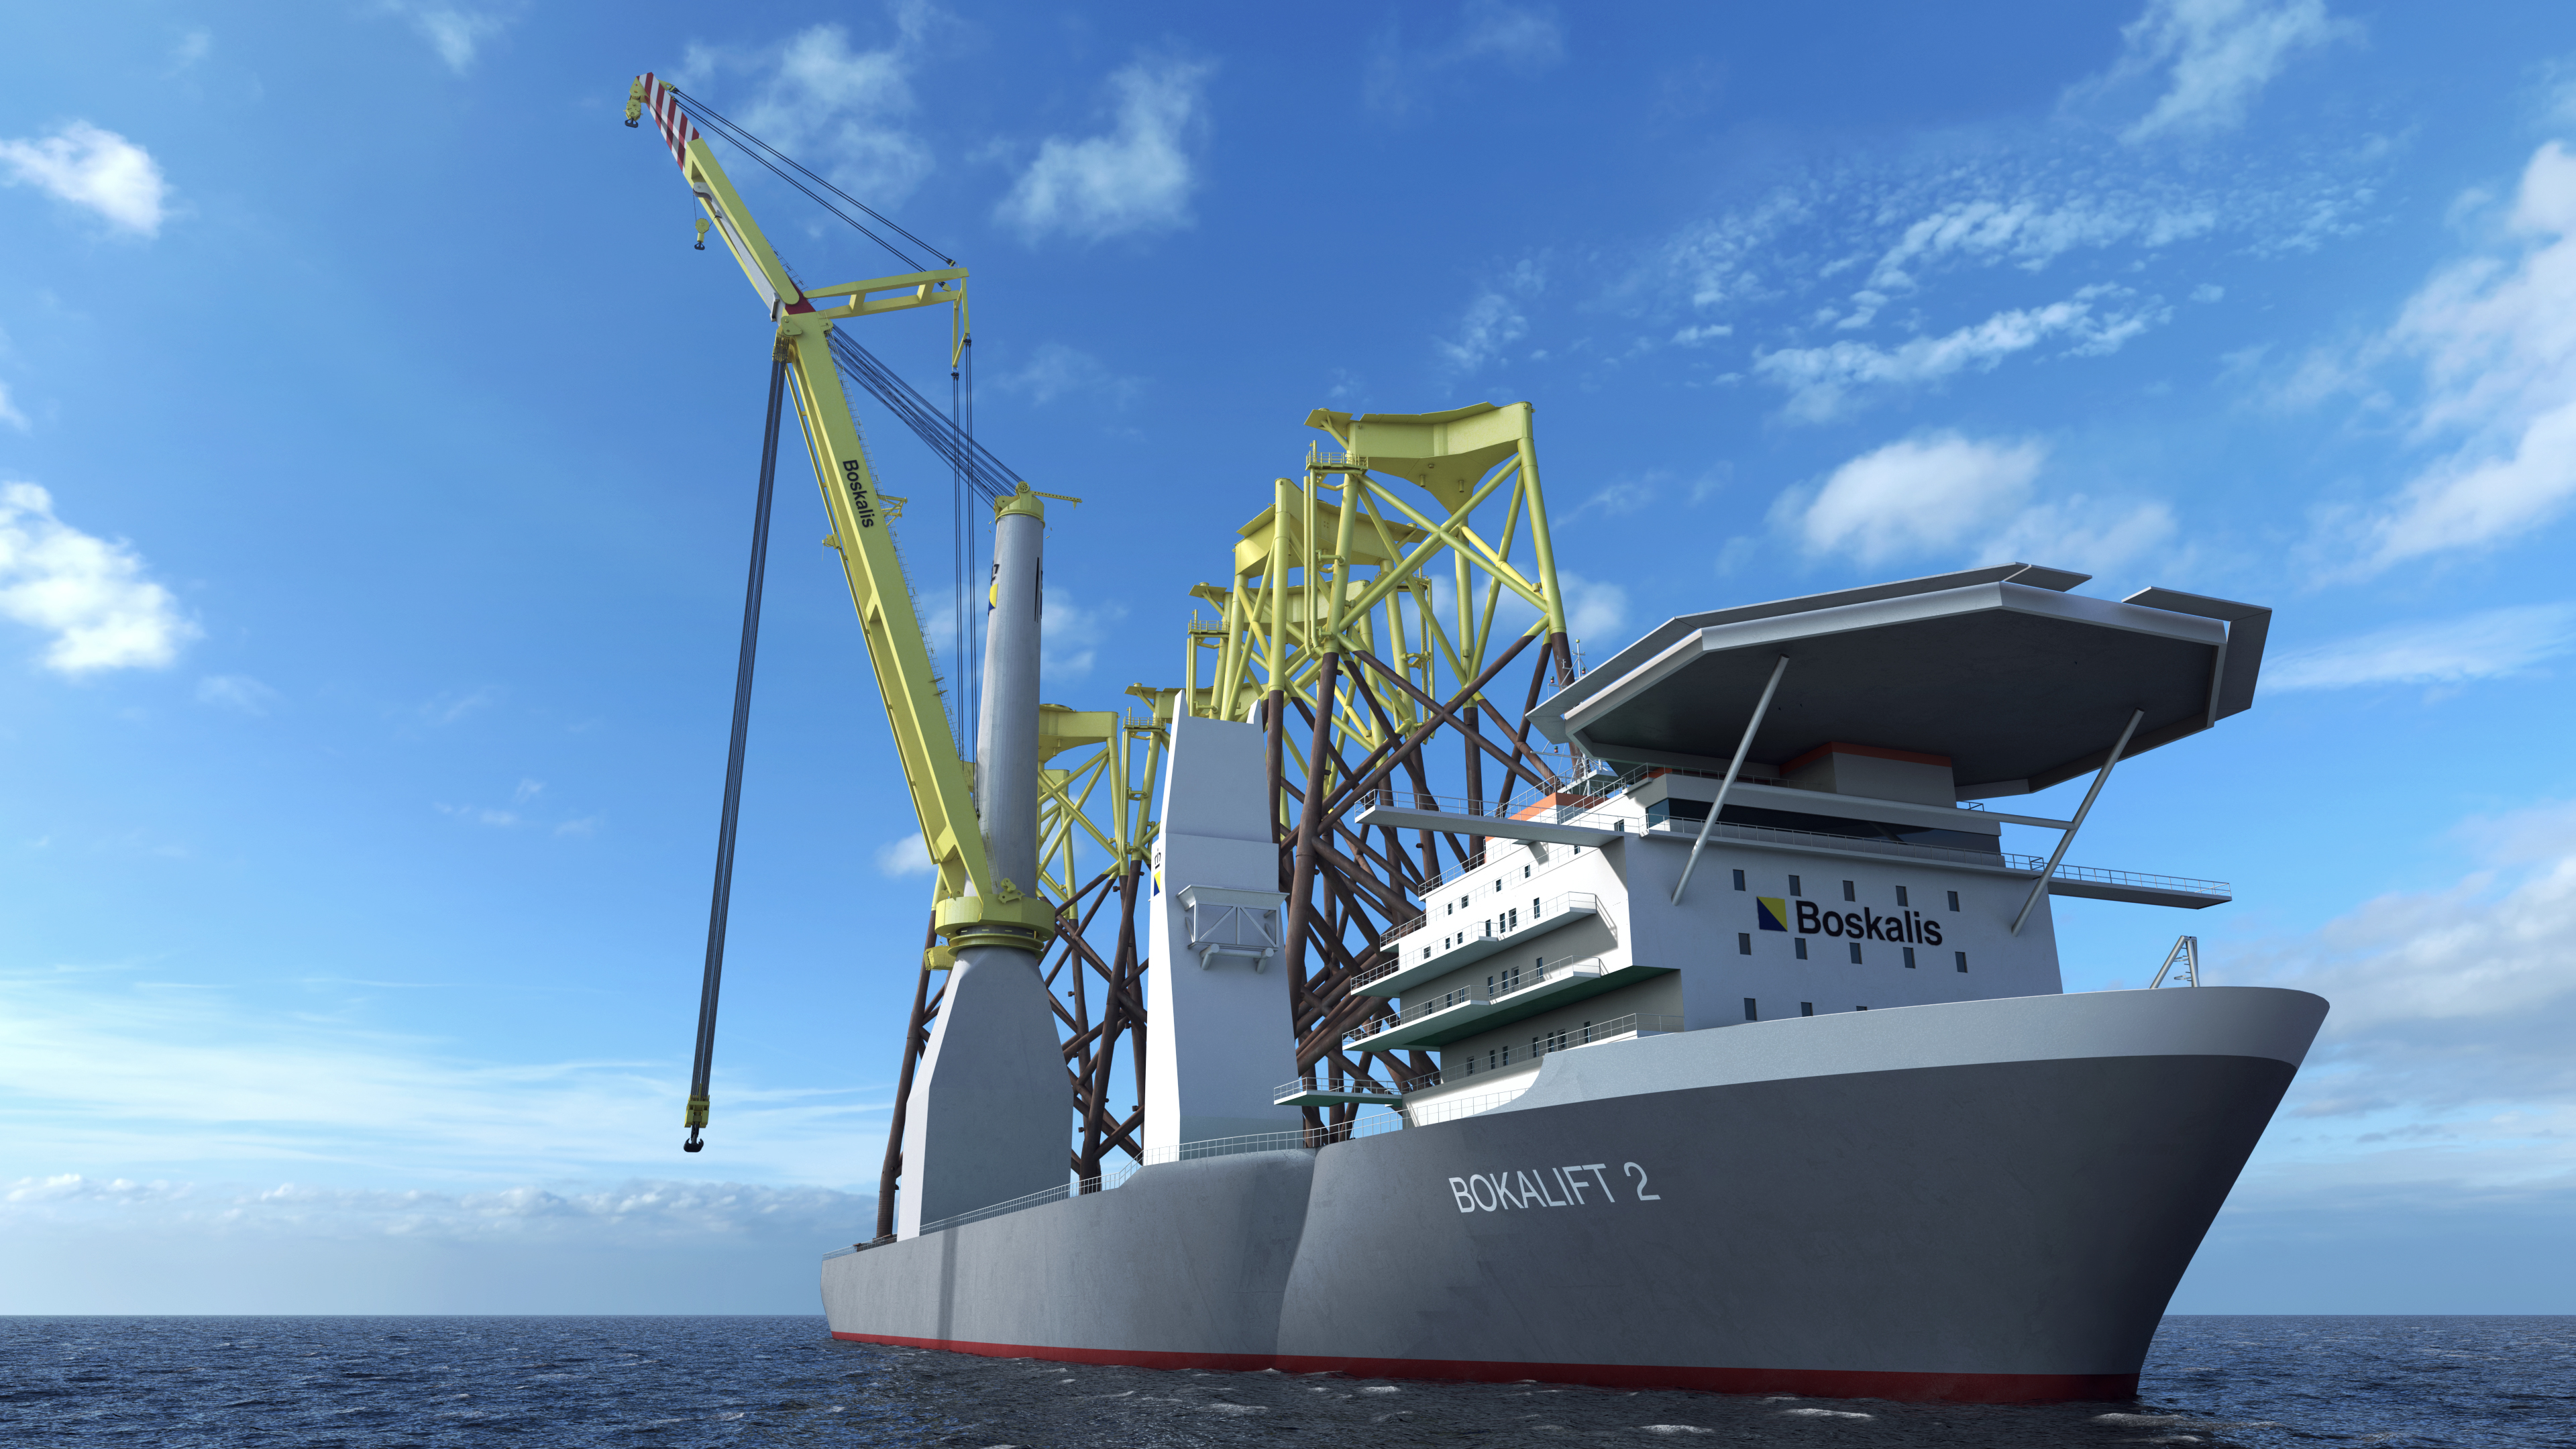 Boskalis awarded Changfang and Xidao offshore wind farm project in Taiwan and announces new Bokalift 2 crane vessel